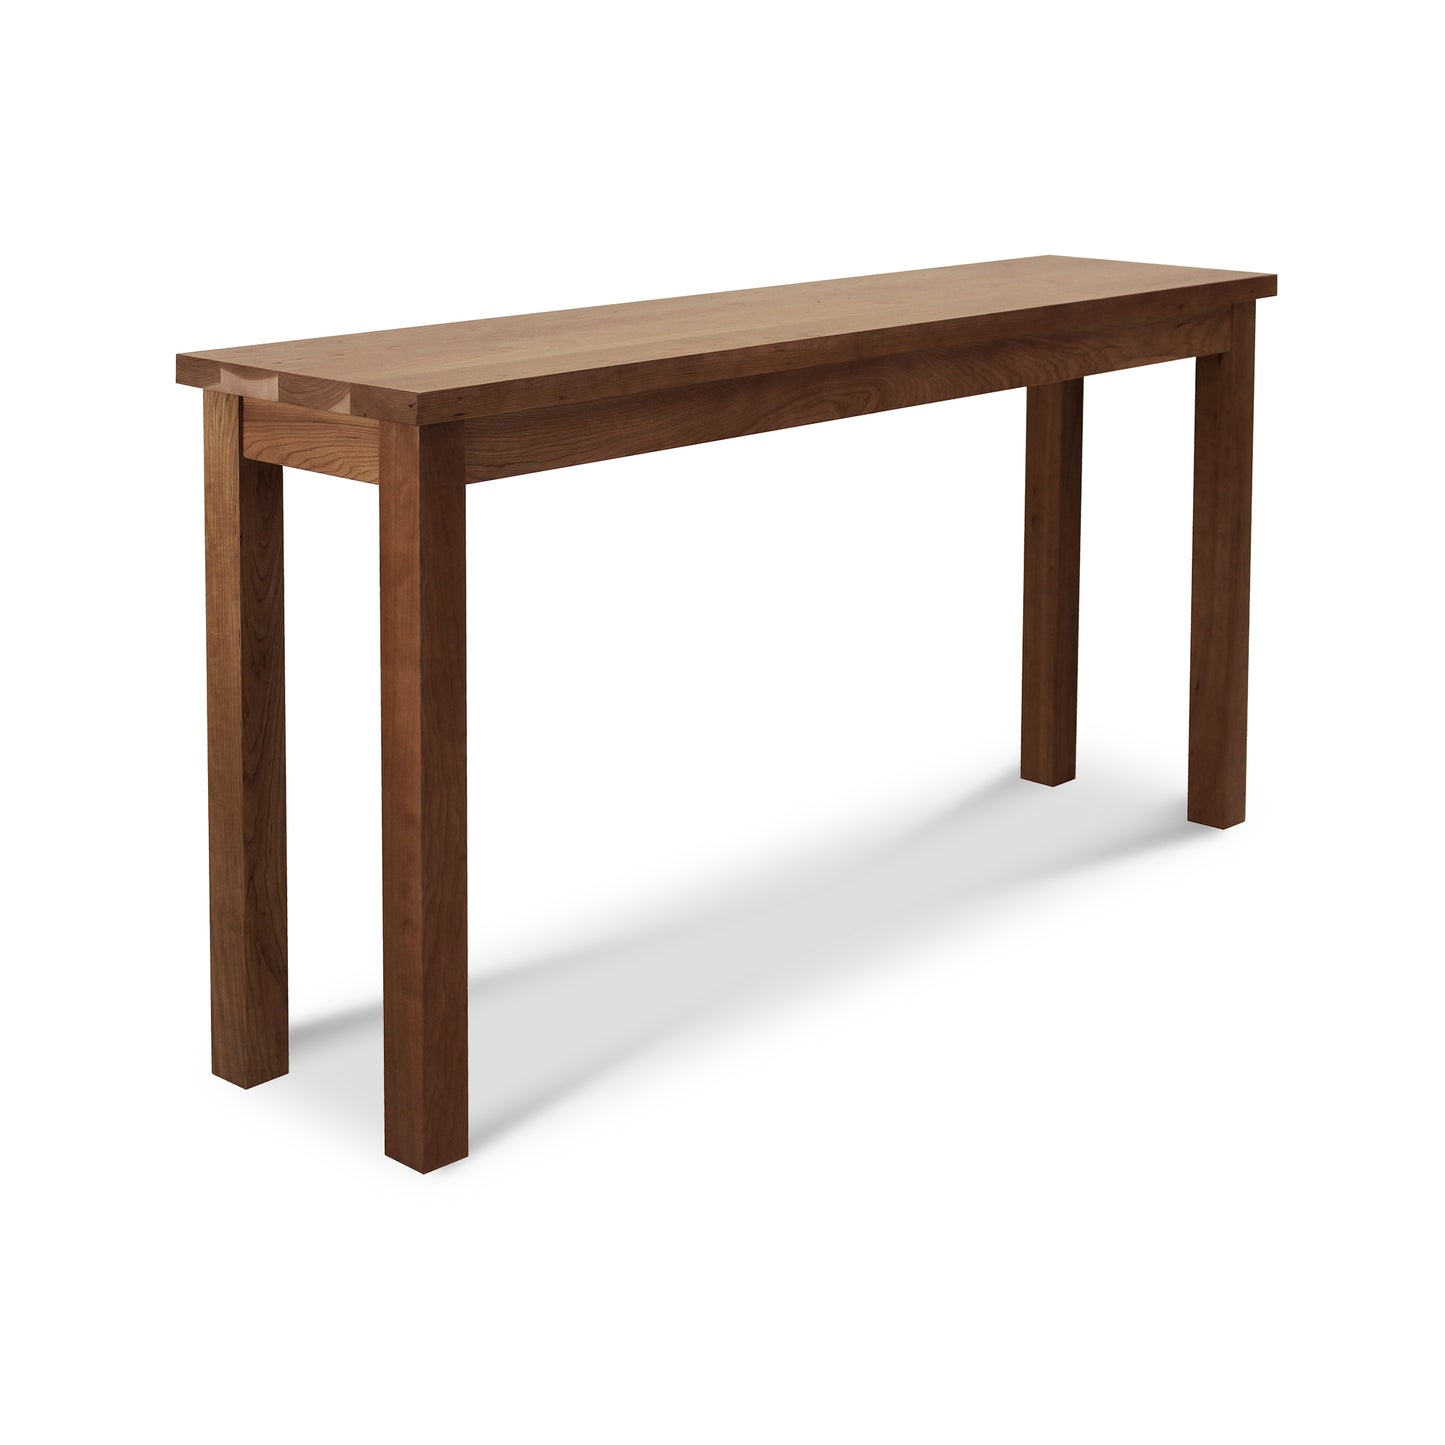 A handcrafted Modern Mission Sofa Table made of natural walnut by Lyndon Furniture on a white background.